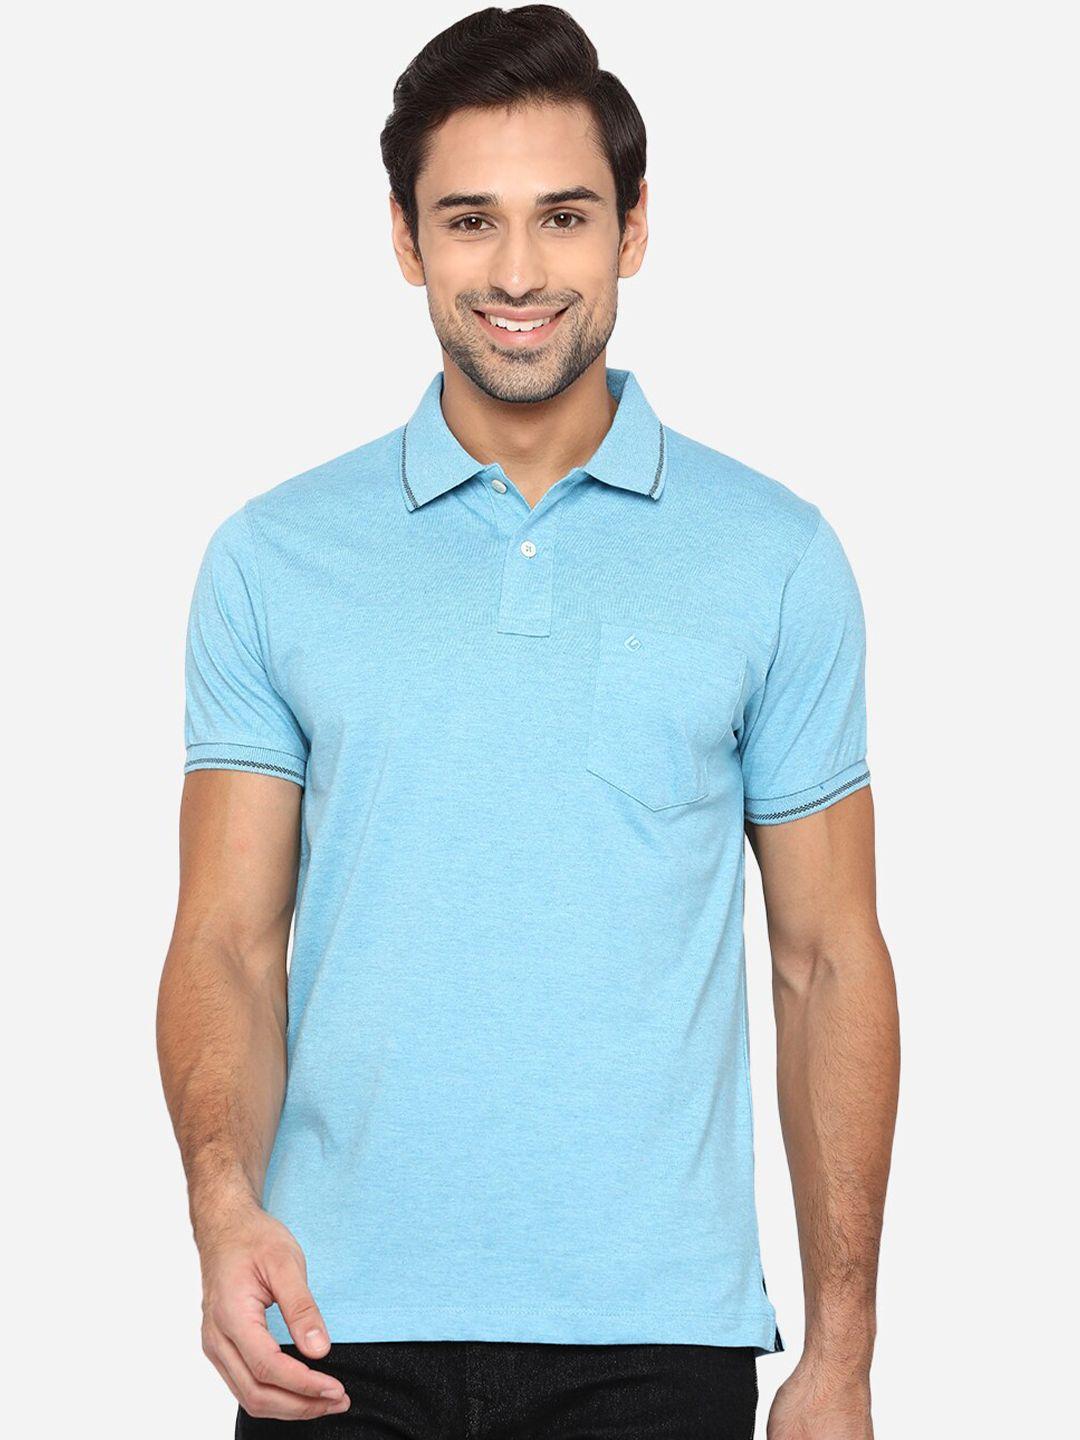 greenfibre-men-turquoise-blue-polo-collar-slim-fit-t-shirt